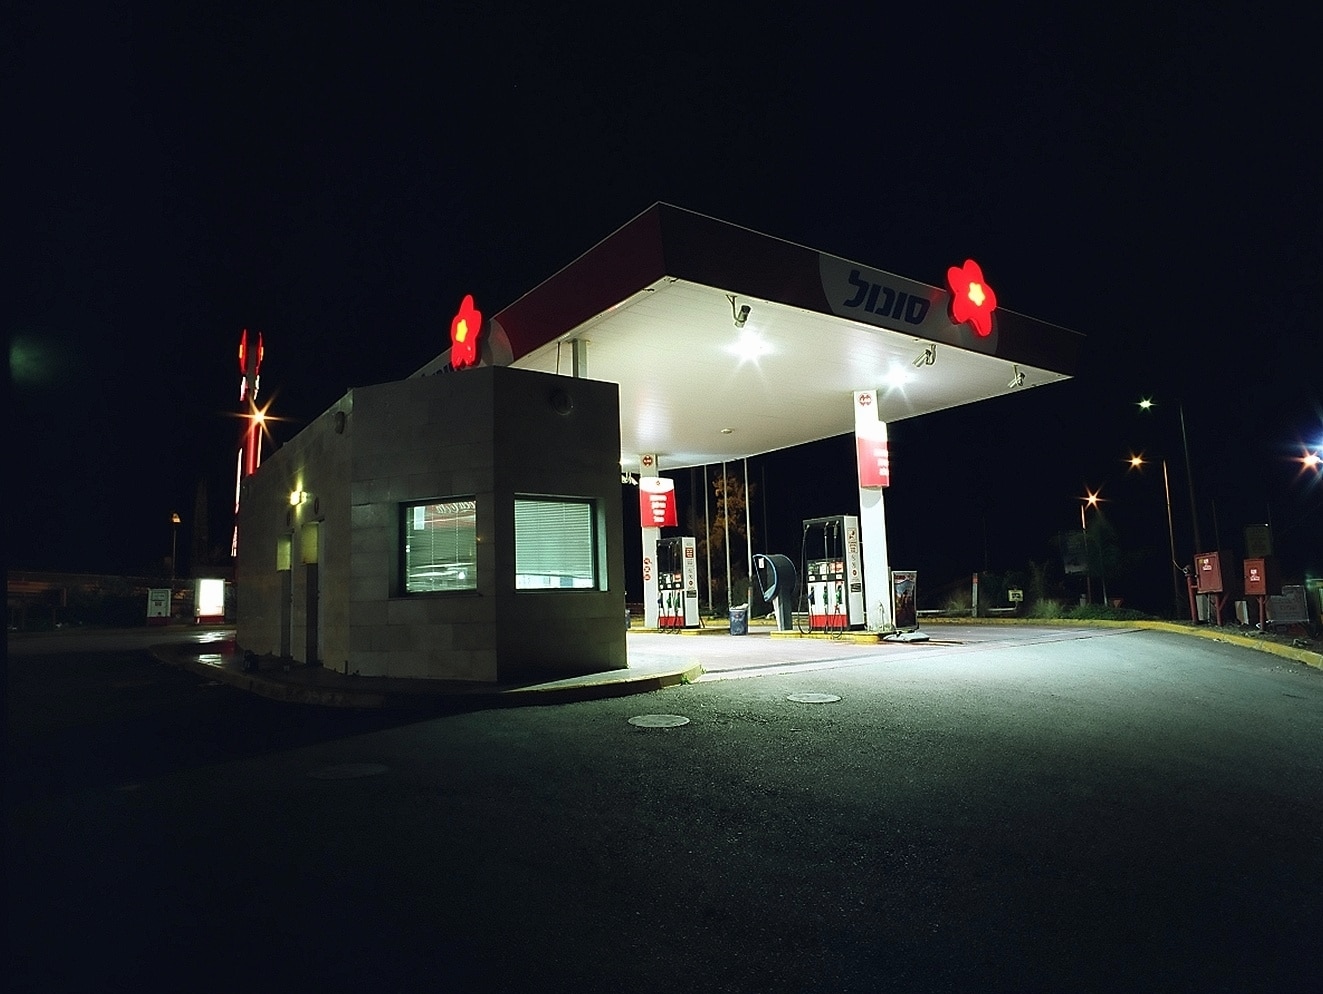 Enlightenment (Gas Stations) Sonol Zkharia (2012)